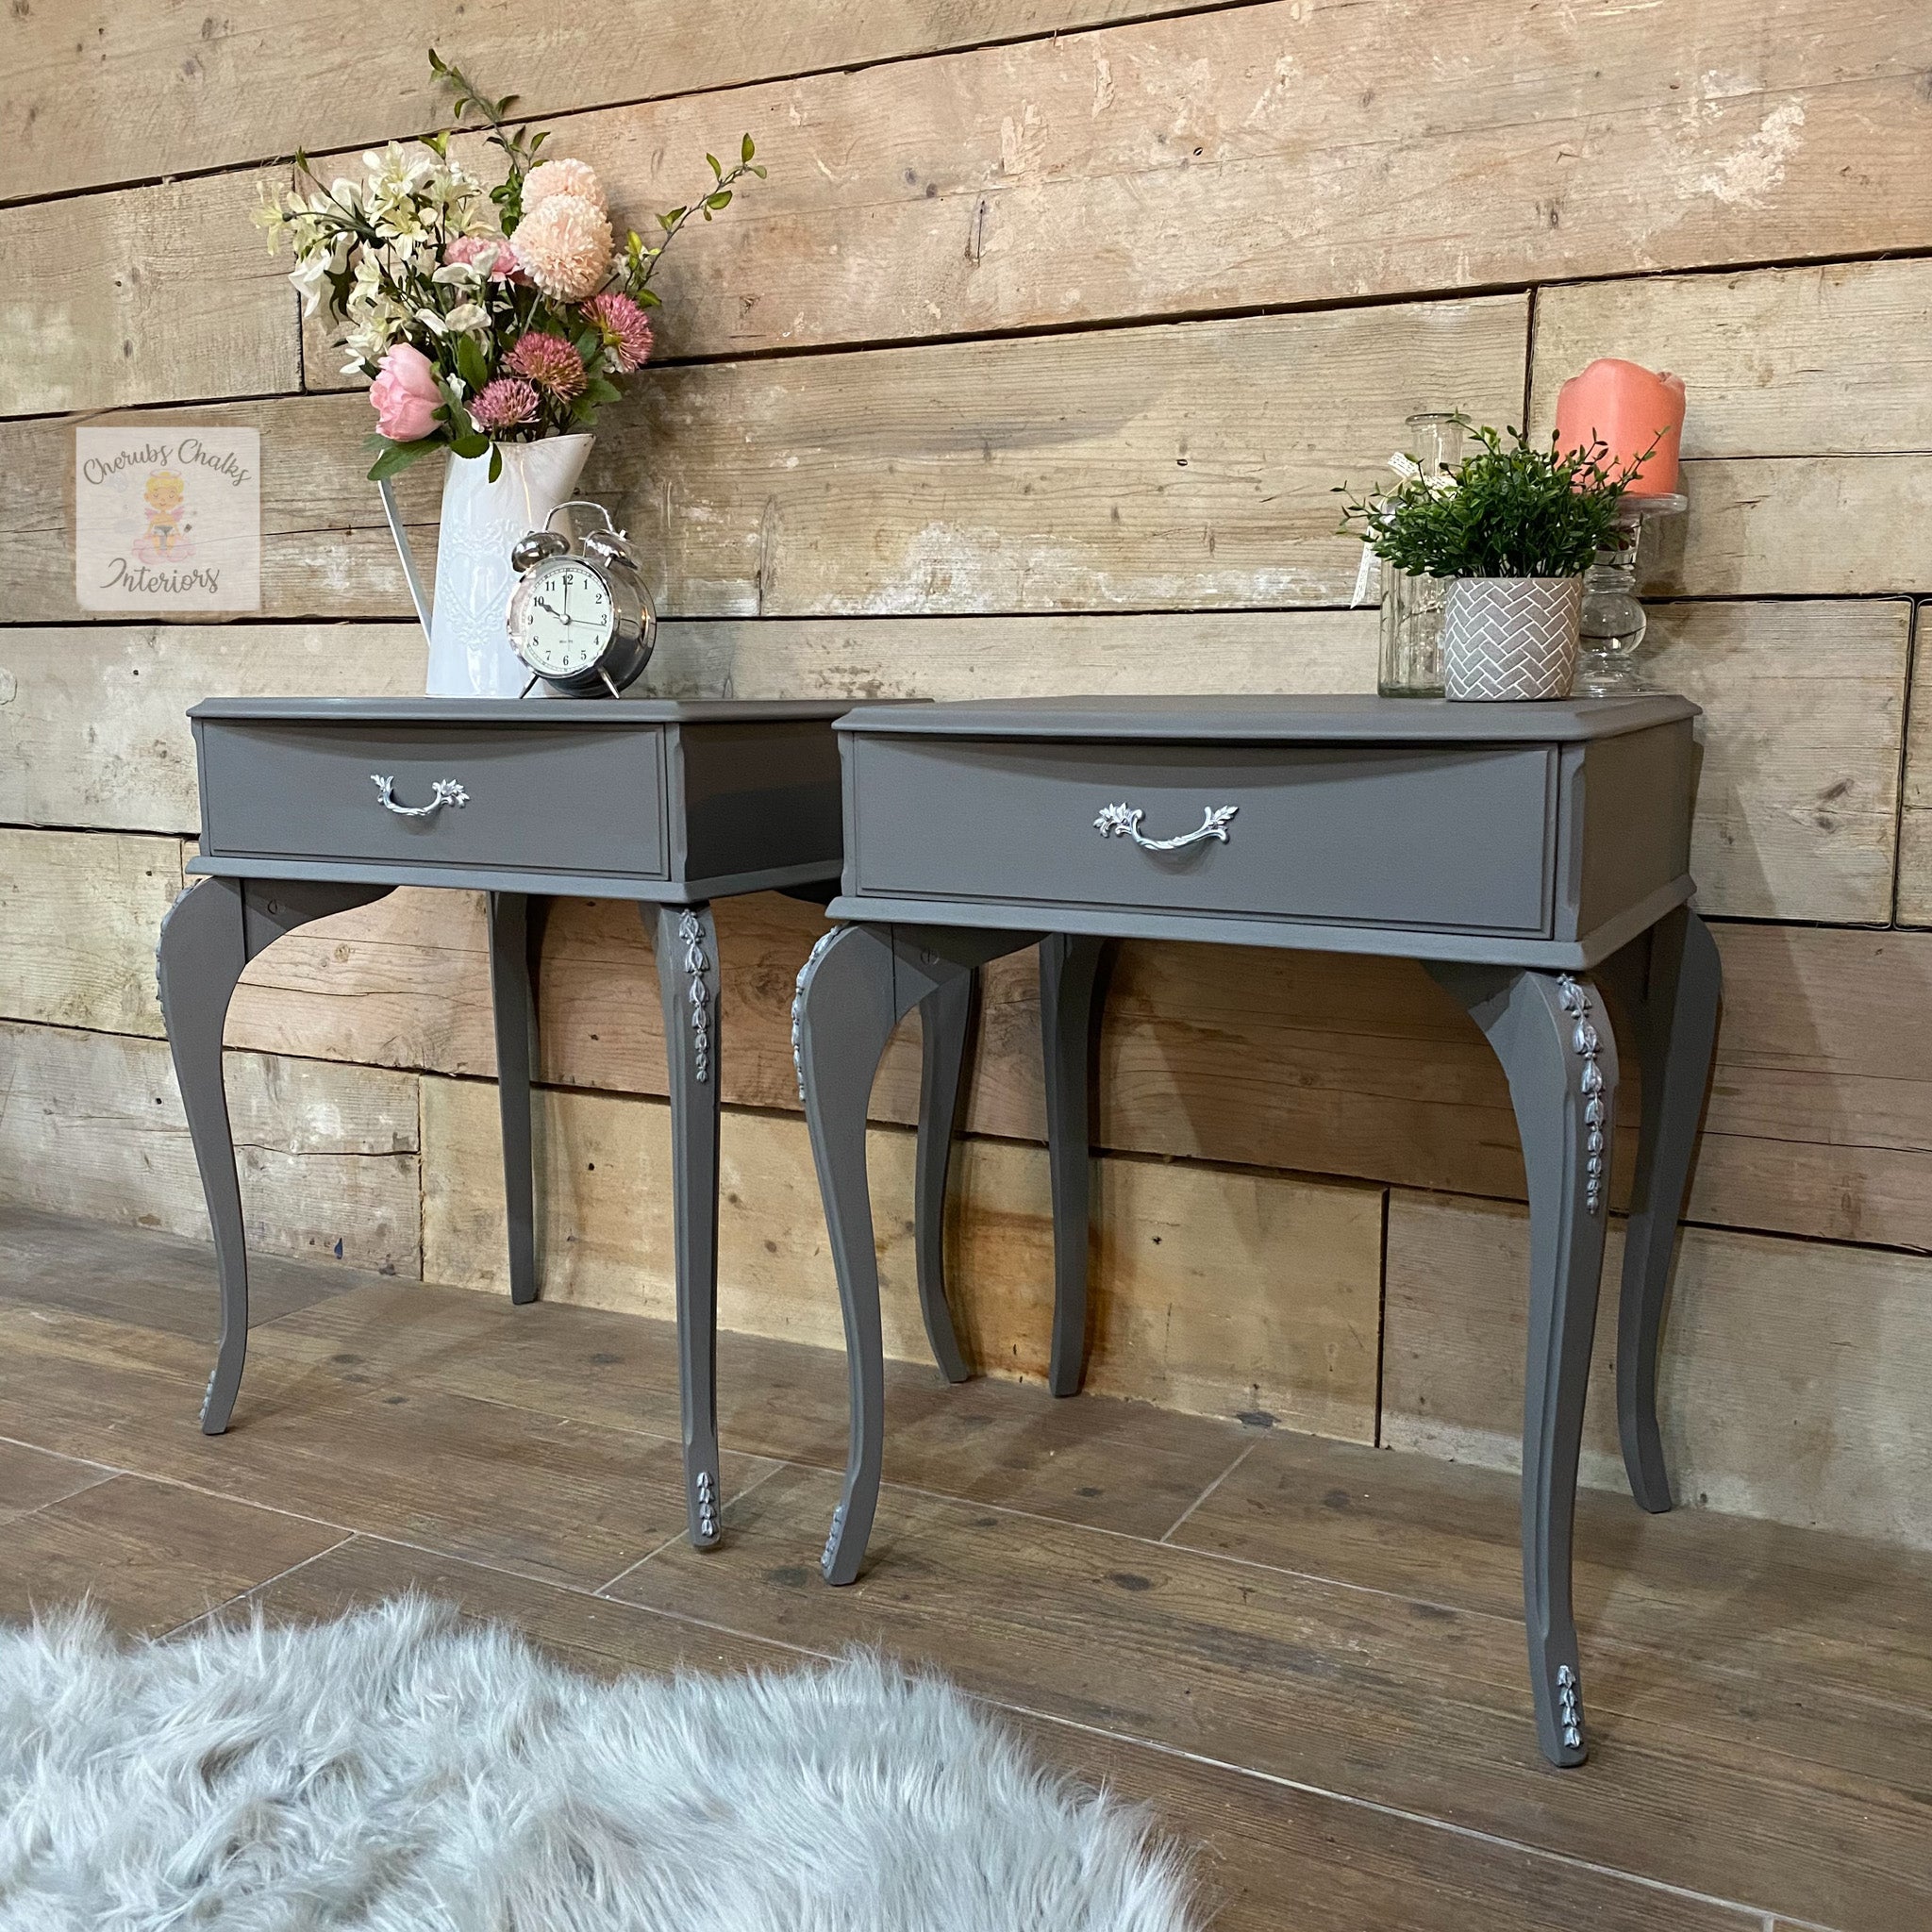 Two vintage nightstands refurbished by Cherubs Chalks Interiors are painted in Dixie Belle's Hurricane Gray chalk mineral paint.